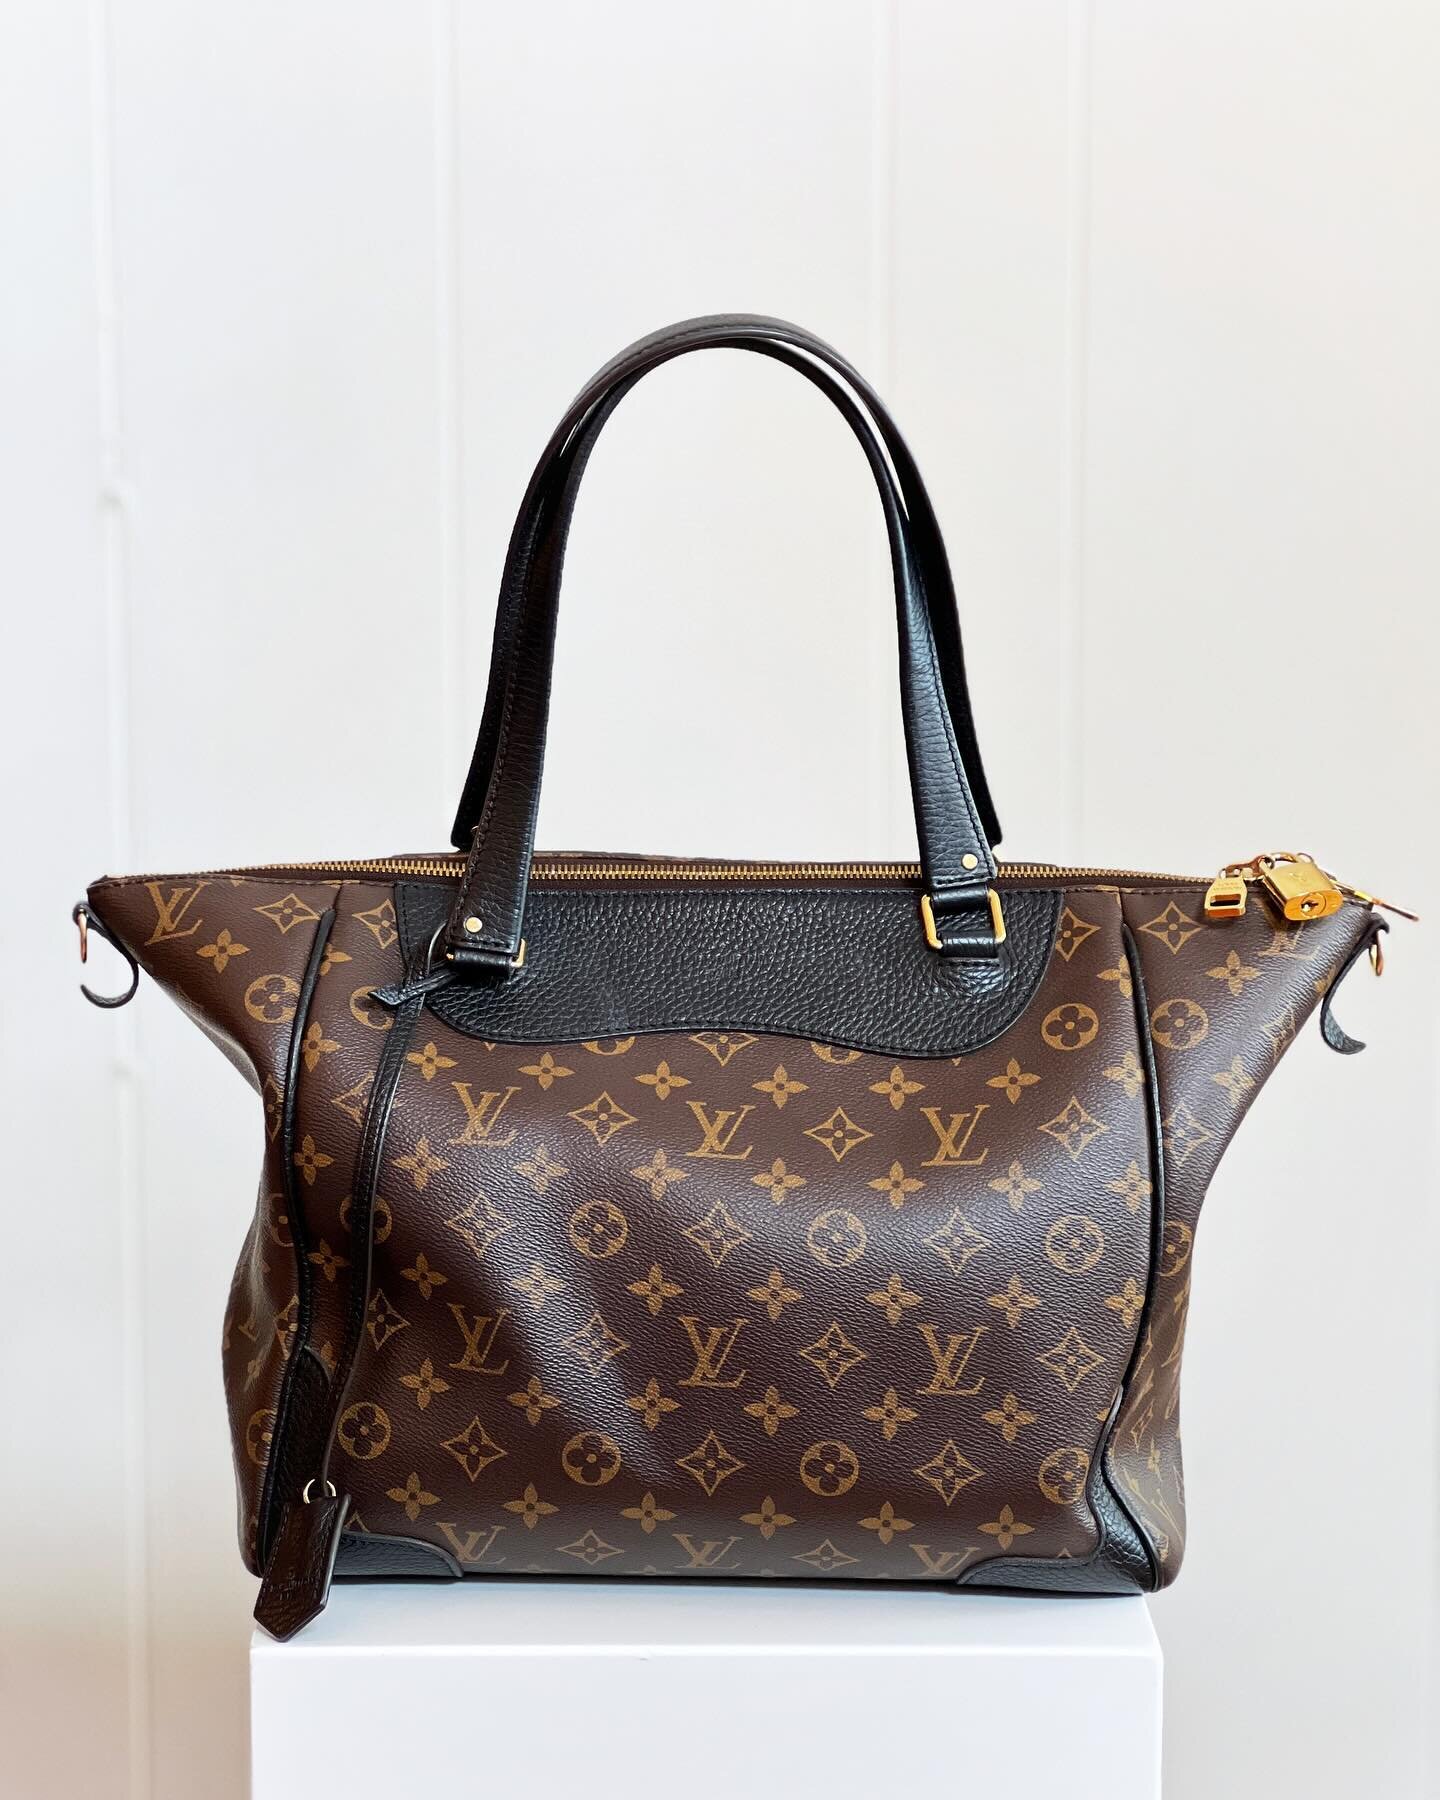 XX SOLD XX 
Pristine Louis Vuitton Estrela Tote now in the shop! 
Shop in store or our website!

DM on instagram for info!
.
.
.
#shopsmall #shoplocal #Connecticut #shopconsignment #guilfordct #womenownedbusiness #marijaneboutique #connecticutbusines